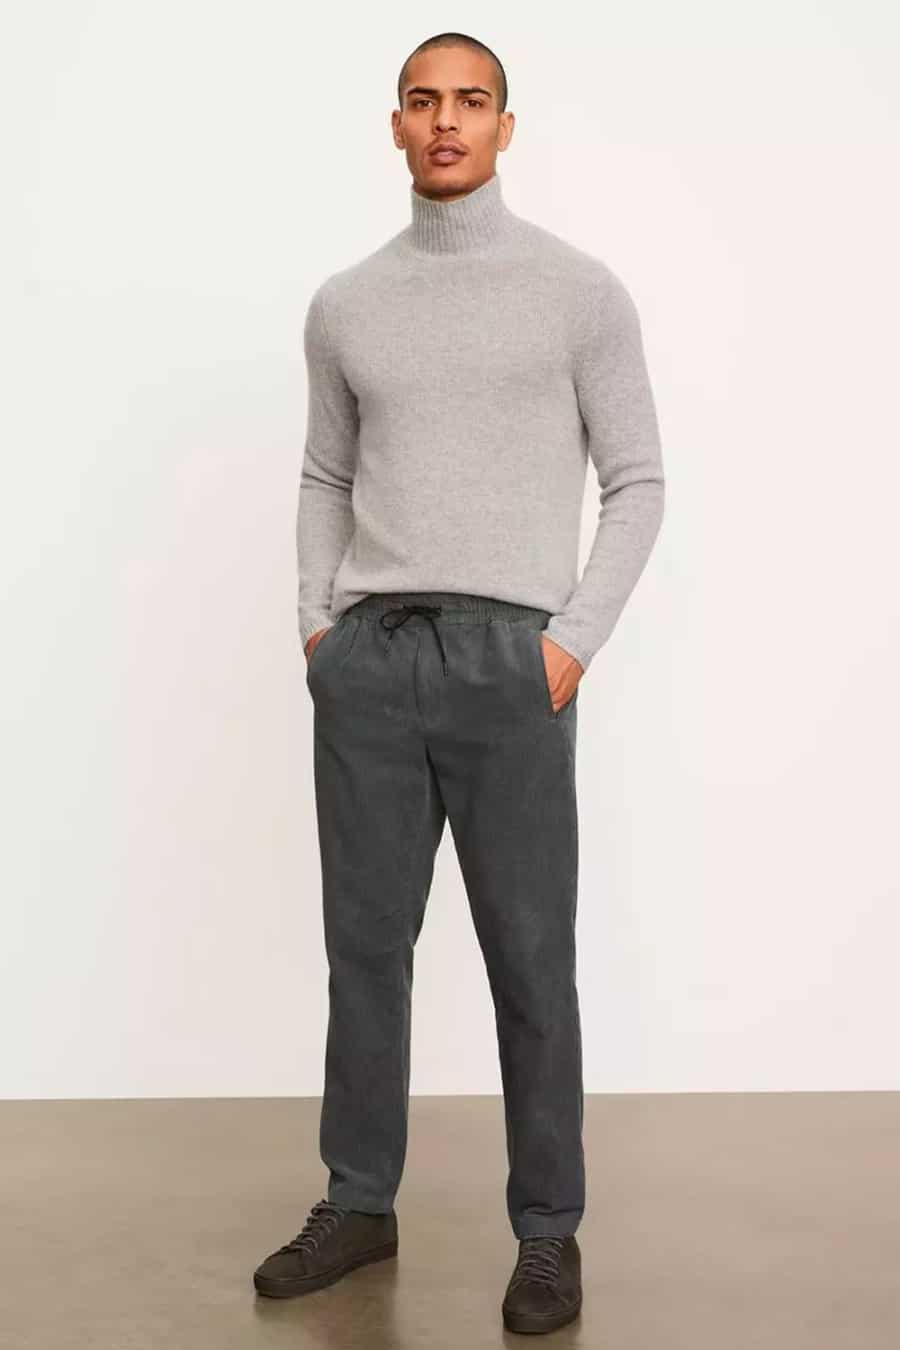 Men's grey pants, grey roll neck and suede sneakers outfit